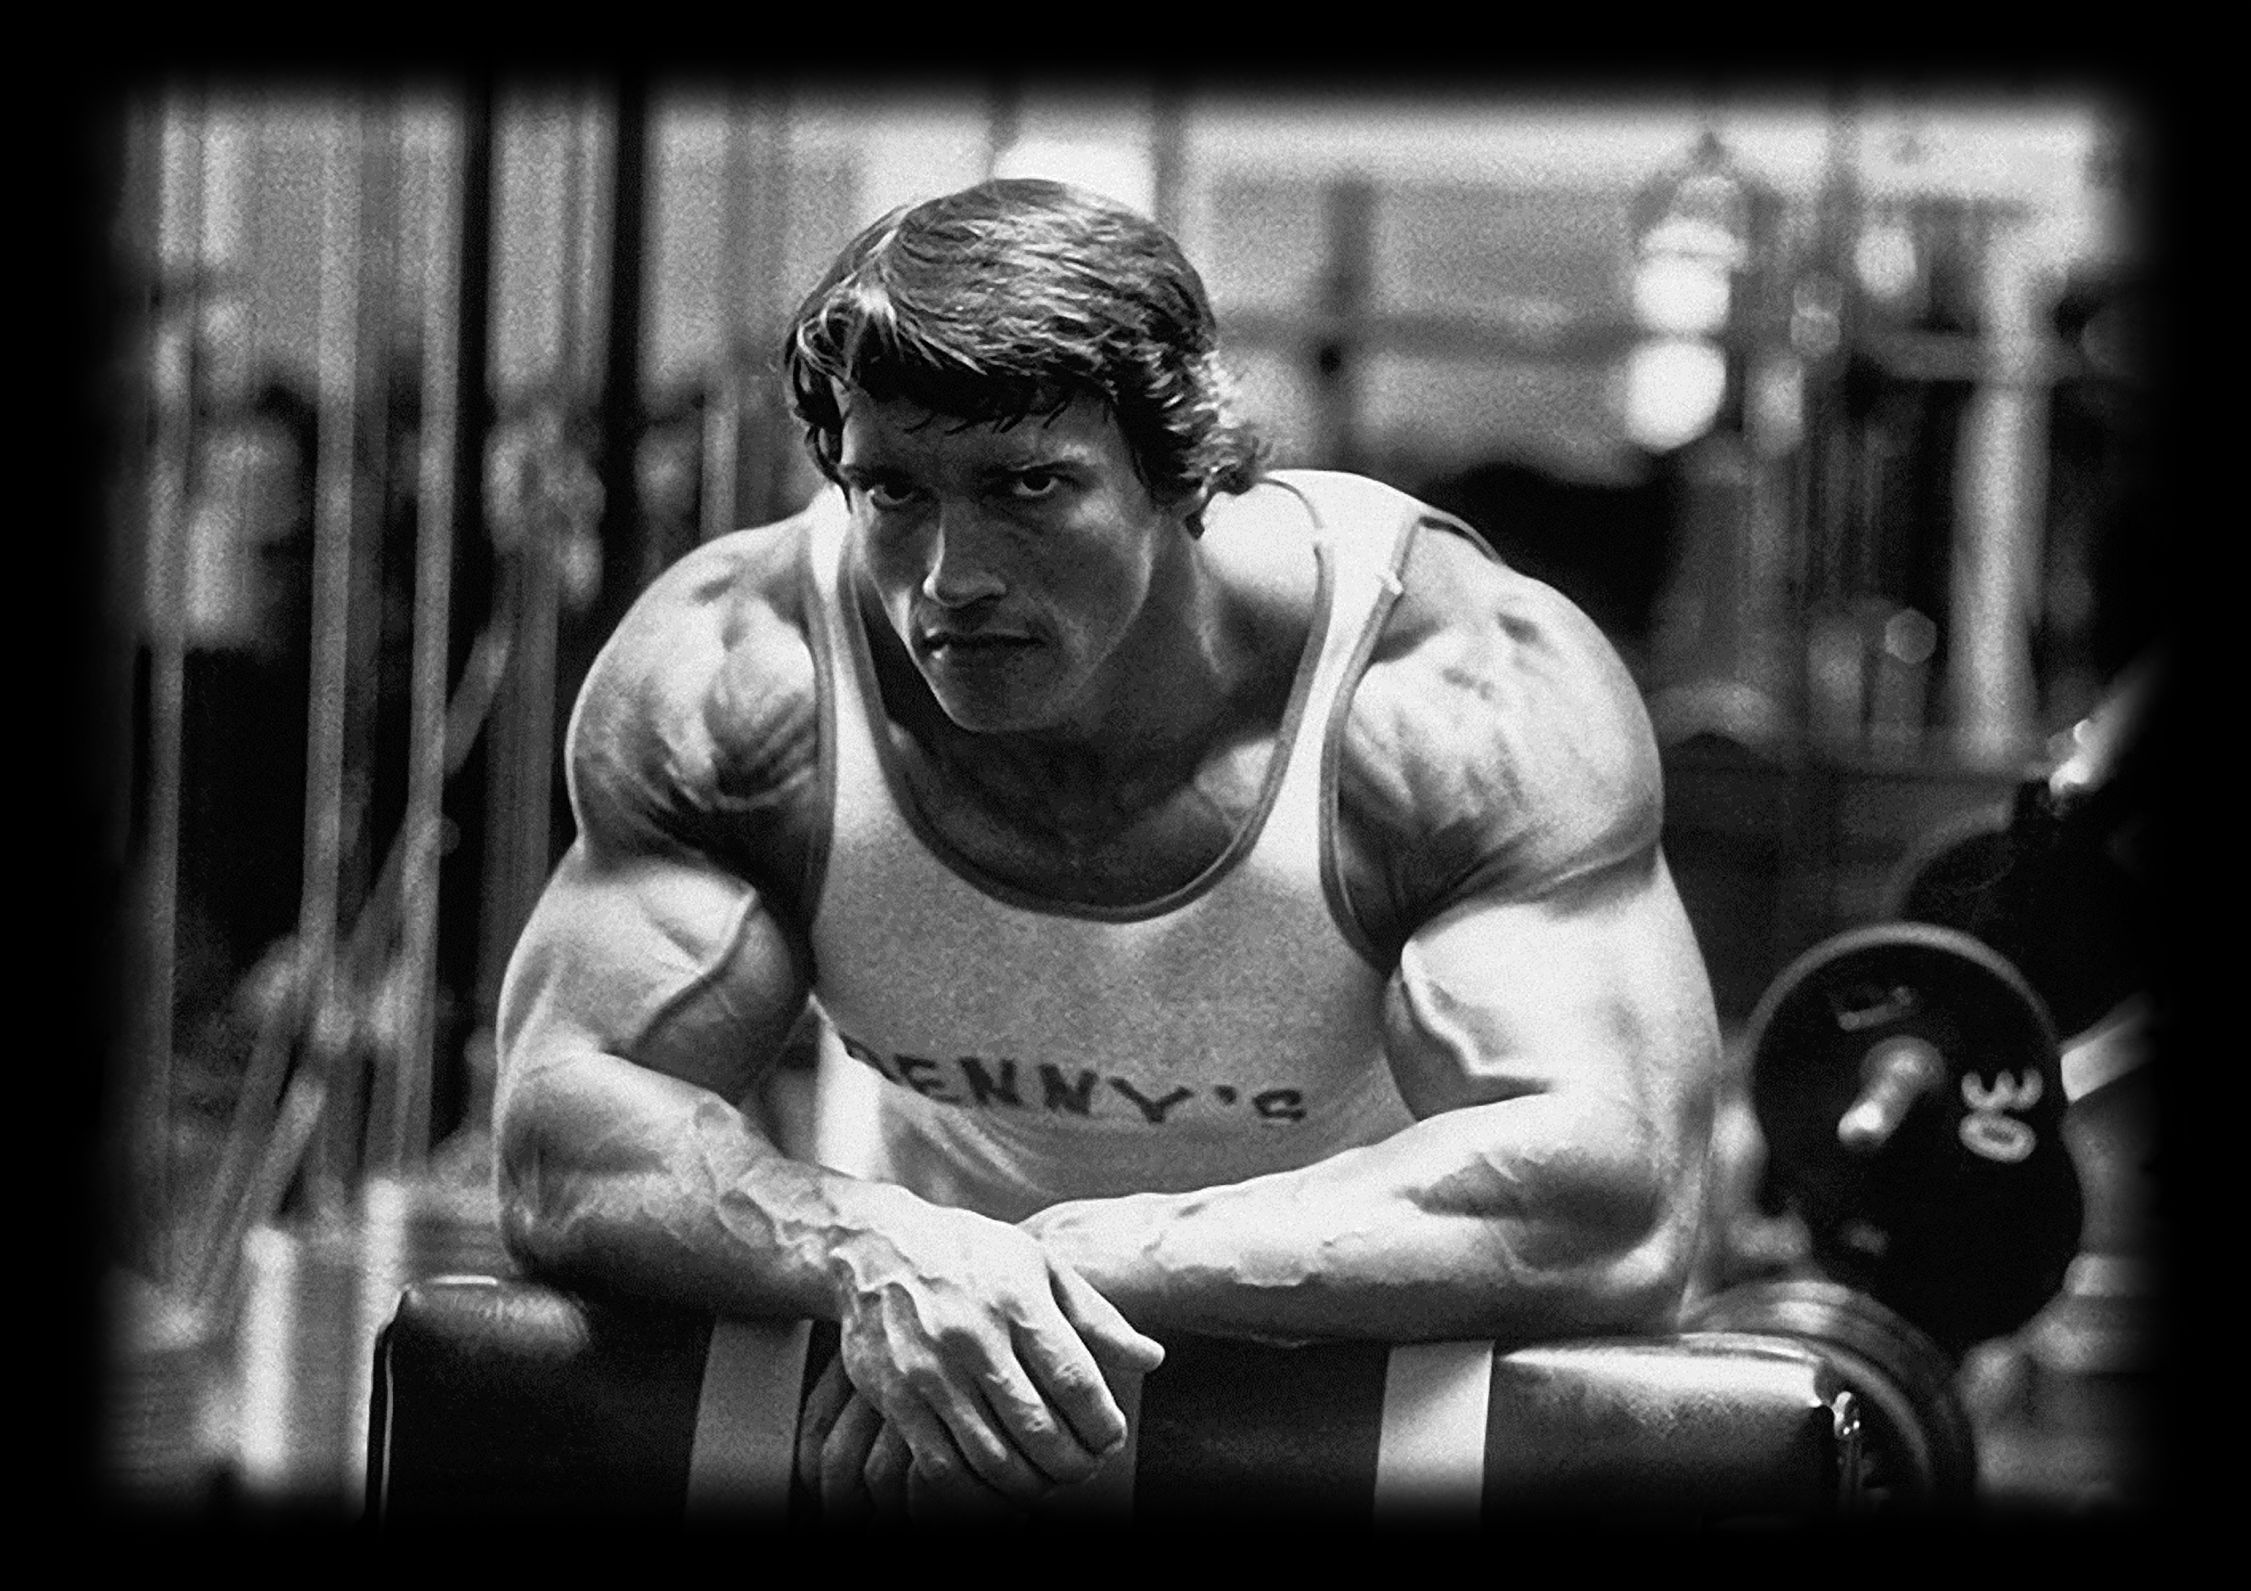 High Quality Arnold Schwarzenegger at Gym Leaning Over Bench B&W Photo Blank Meme Template